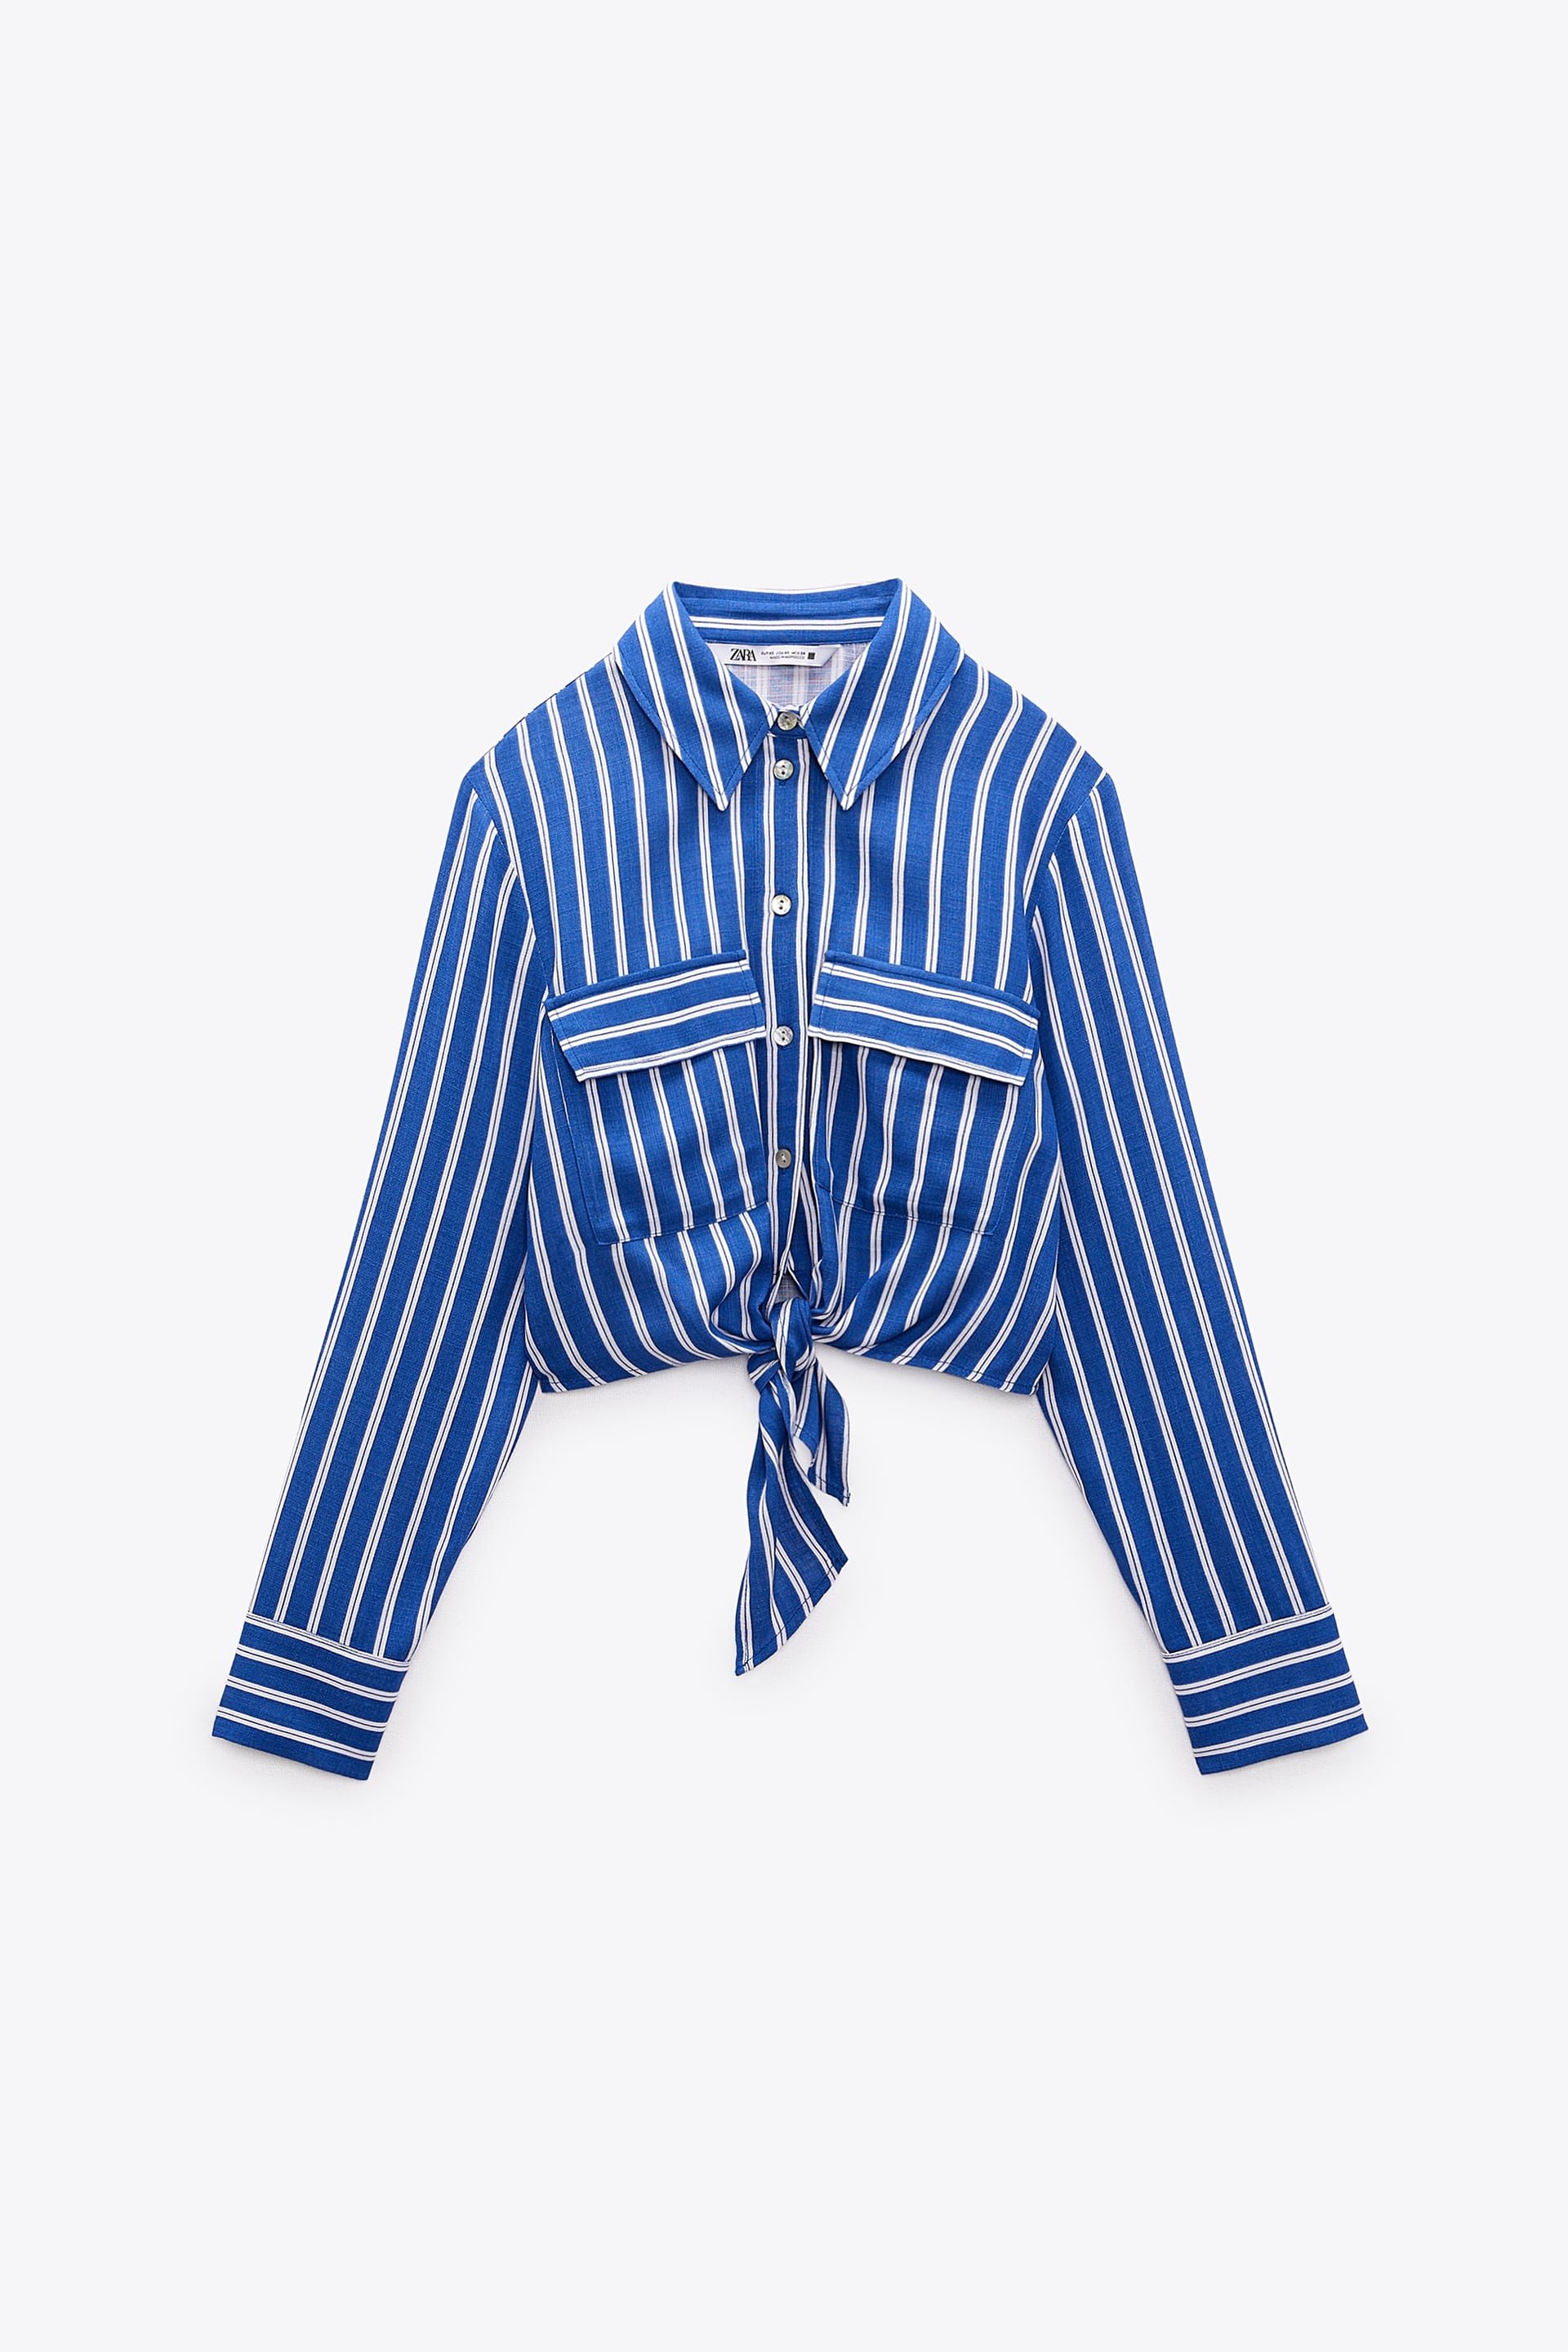 Zara Cropped Shirt with Knot in Blue White.jpg